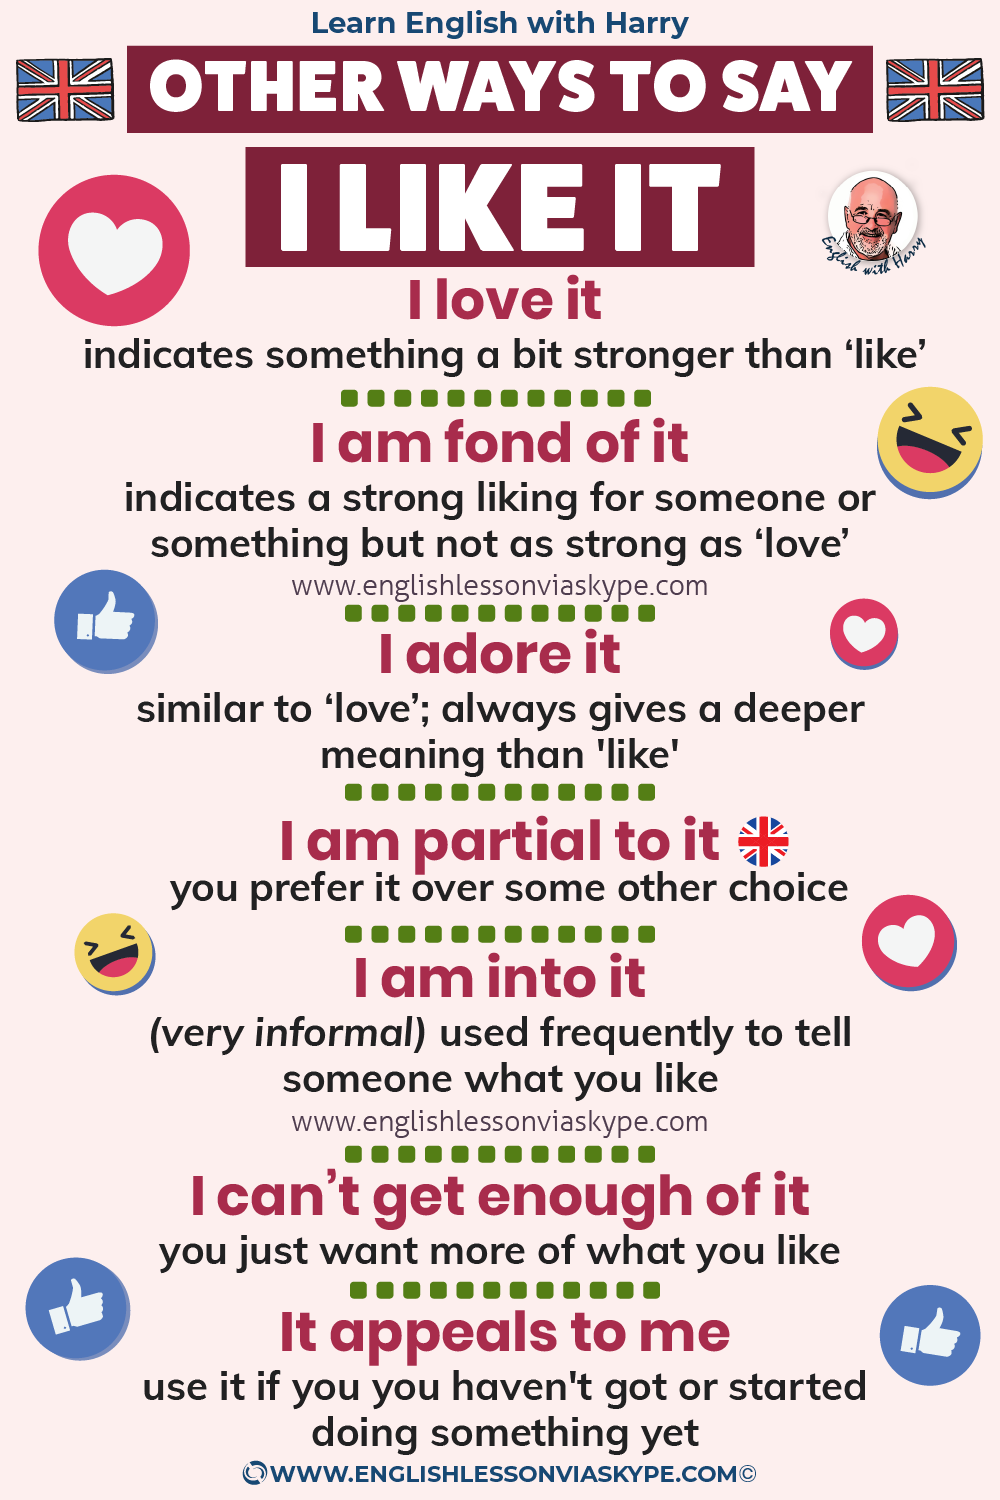 Other words for Like in English. Different ways to say I like it in English. Study advanced English. Online English lessons on Zoom or Skype at www.englishlessonviaskype.com #learnenglish #englishlessons #EnglishTeacher #vocabulary